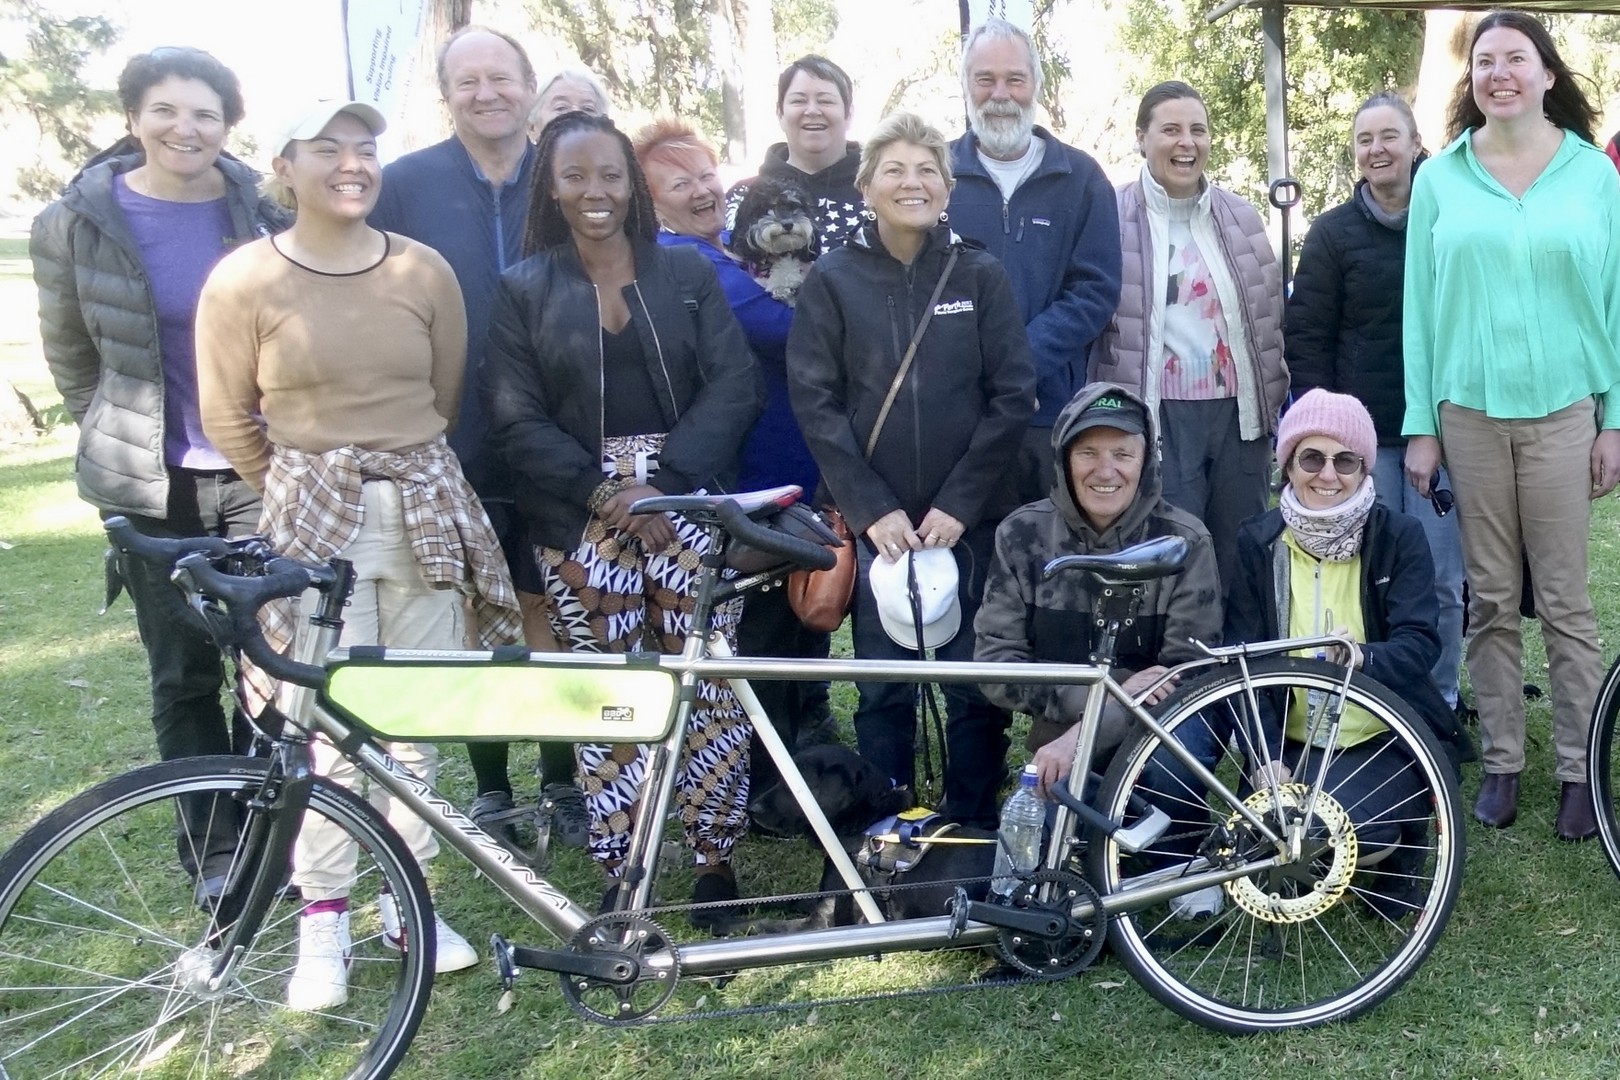 Group photo in front of a silver tandem, including volunteers involved in fundraising, tandem clinics and our general riding programs.